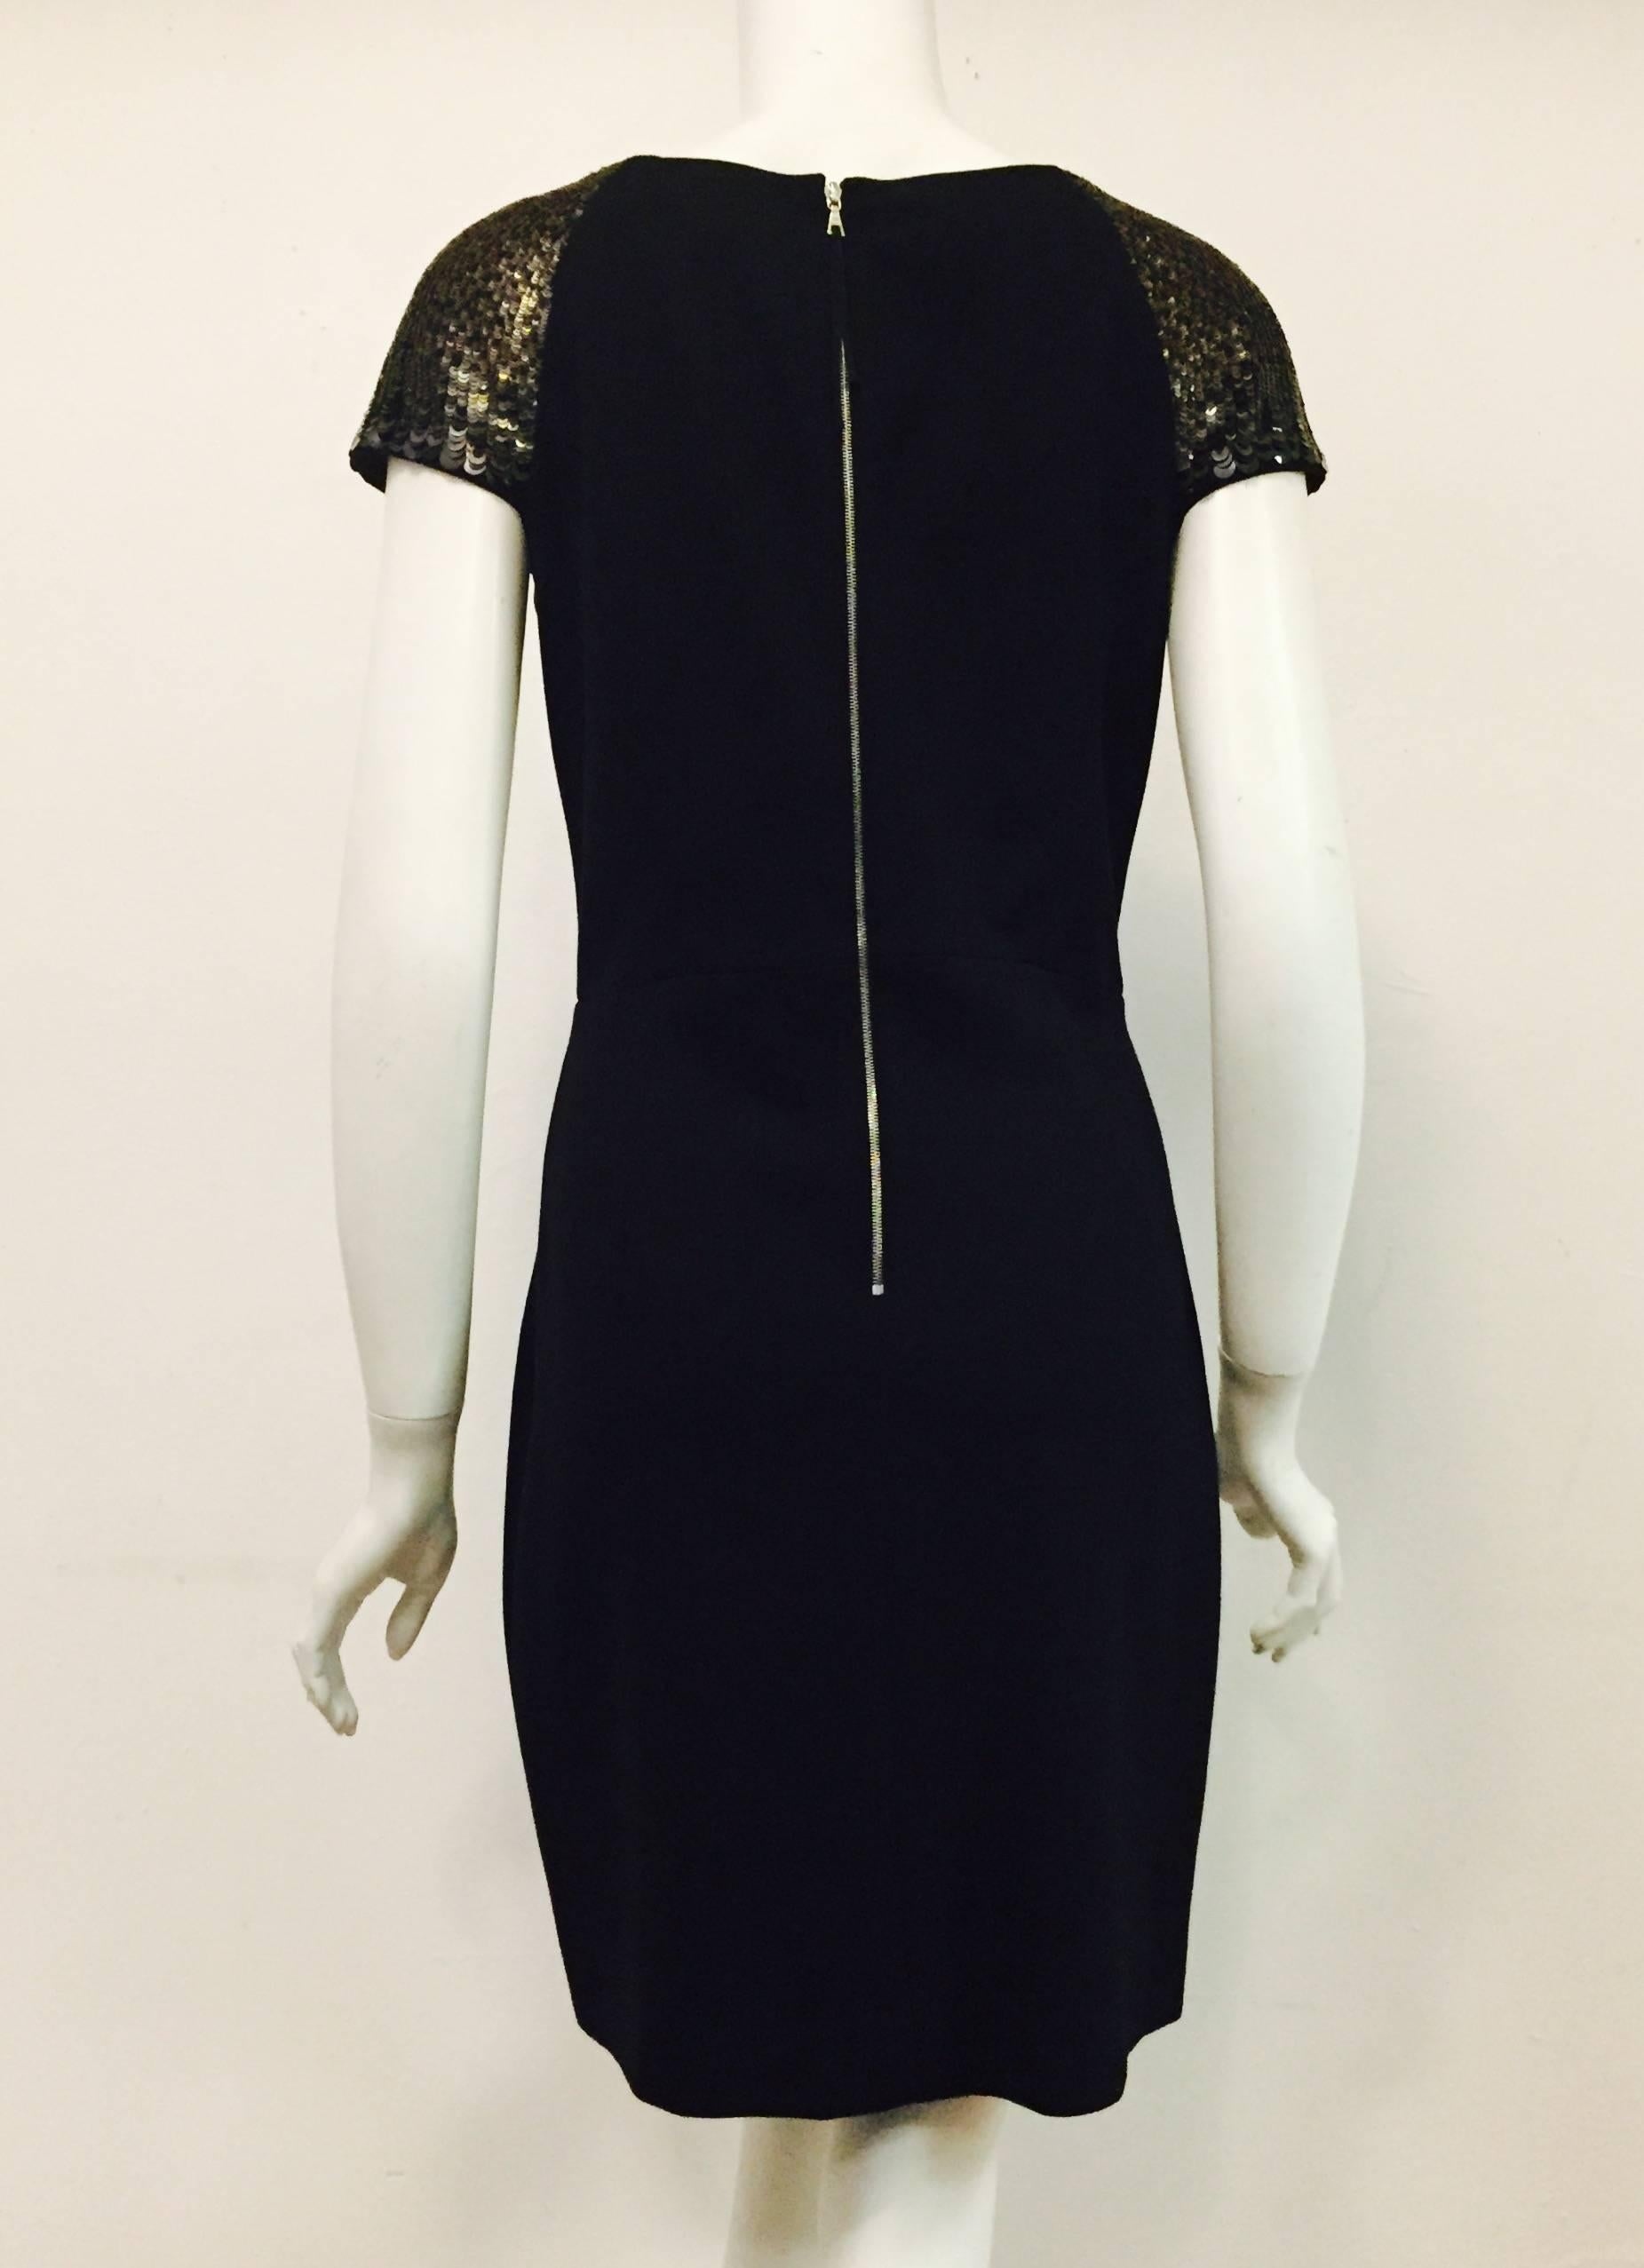 Wonderful Jason Wu Black Silk Dress with Sequined Cap Sleeves In Excellent Condition For Sale In Palm Beach, FL